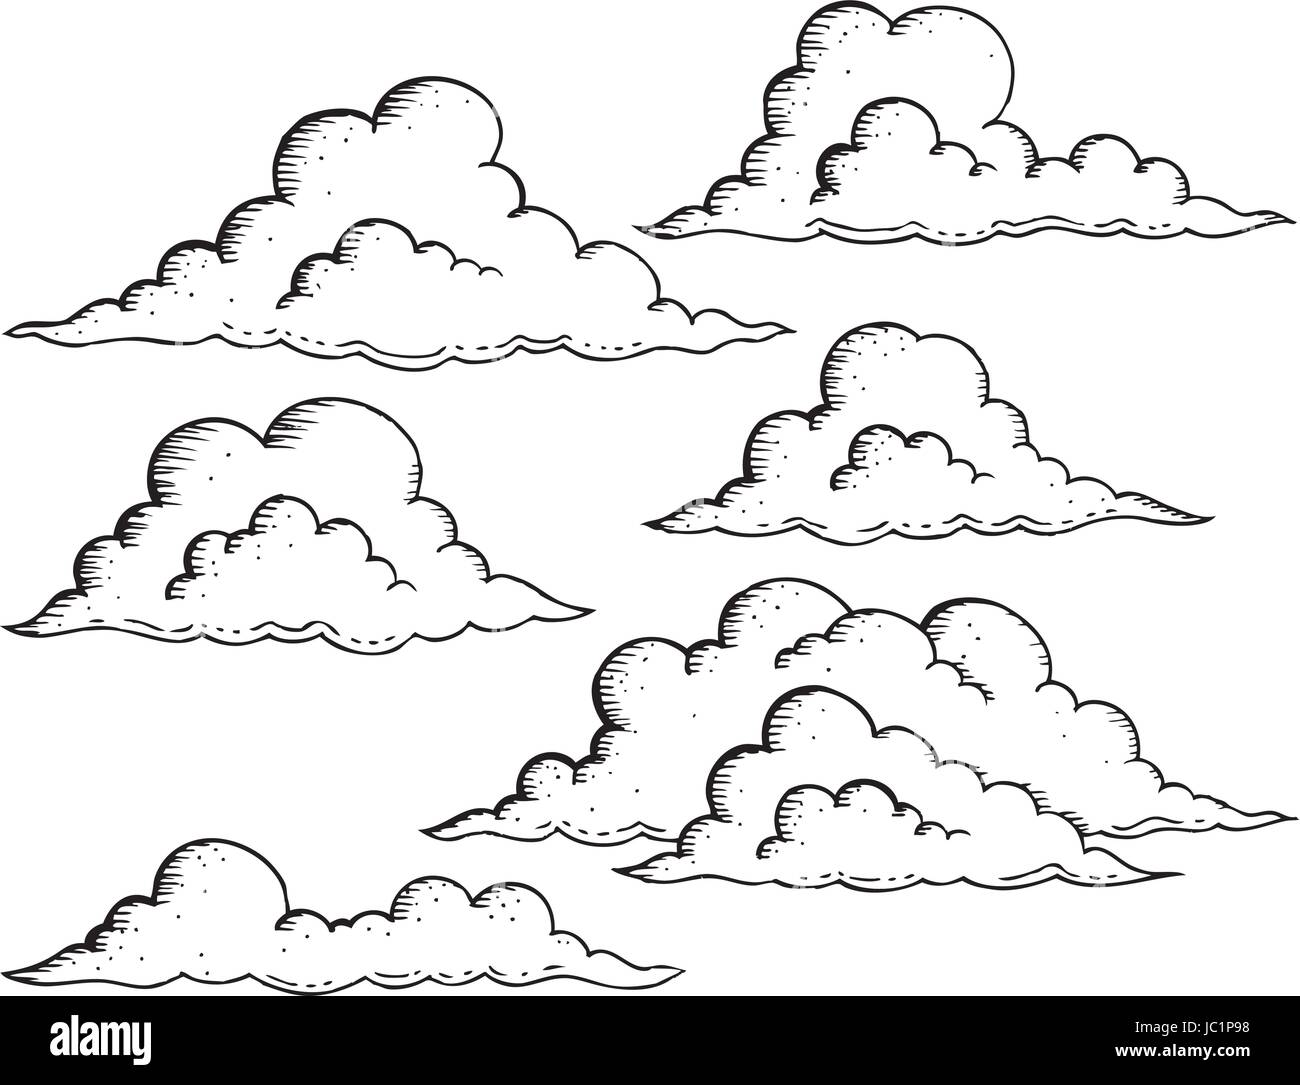 Clouds drawings theme image 1 - eps10 vector illustration. Stock Vector